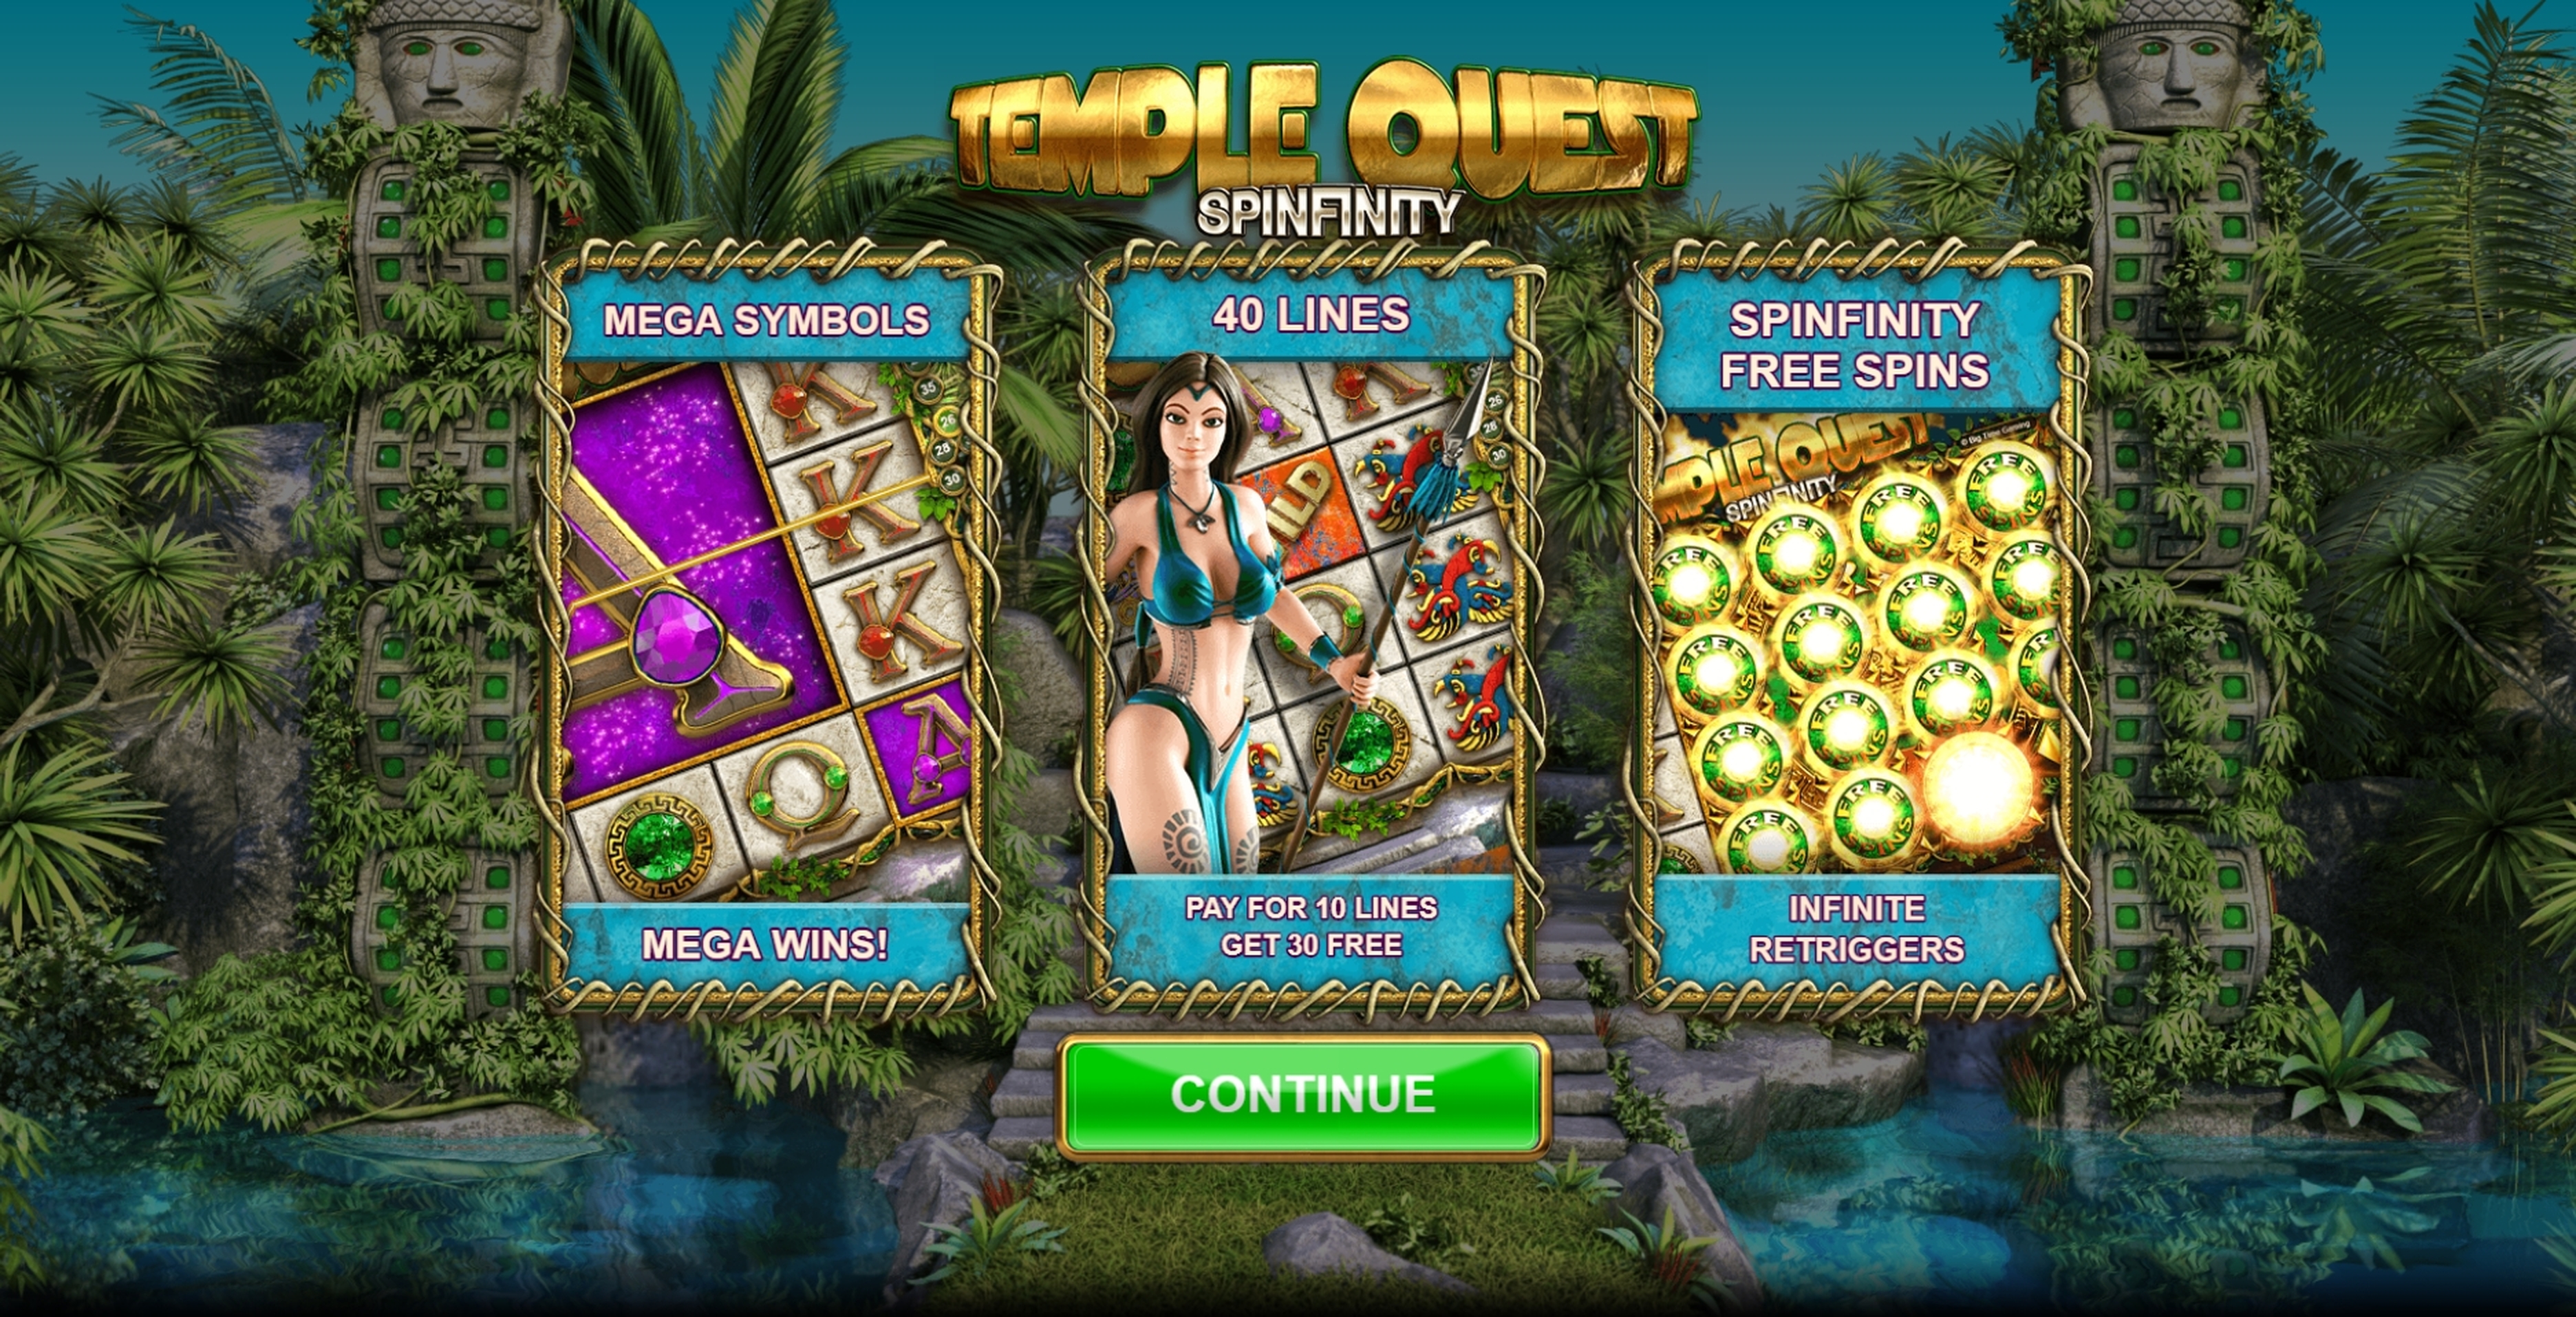 Play Temple Quest Spinfinity Free Casino Slot Game by Big Time Gaming